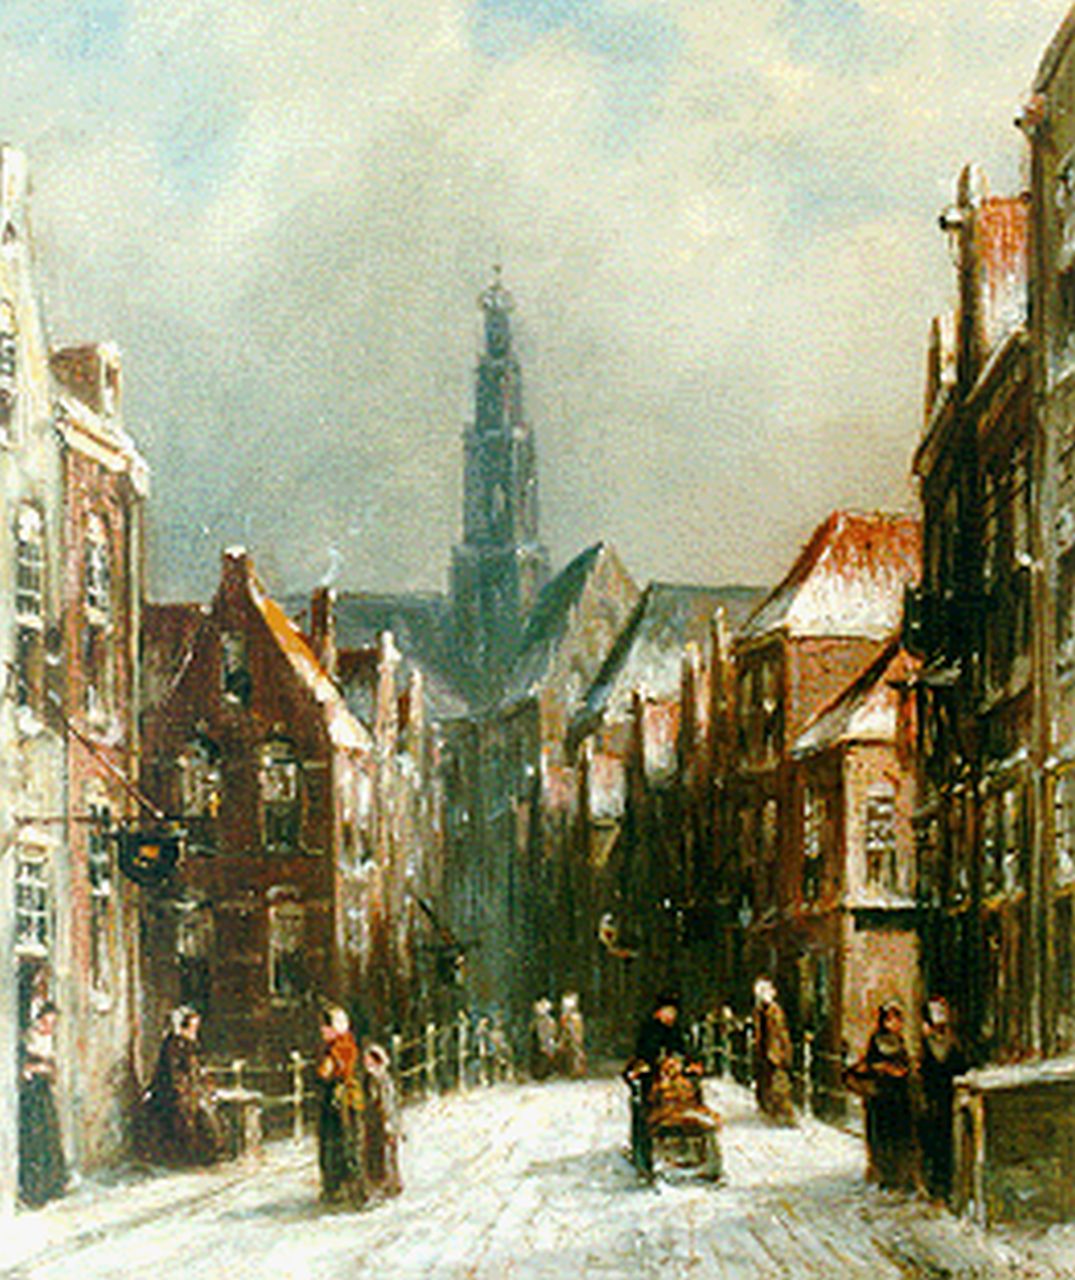 Vertin P.G.  | Petrus Gerardus Vertin, A view of Haarlem with the St. Bavo in the distance, oil on panel 21.2 x 17.7 cm, signed l.r. and dated 1892